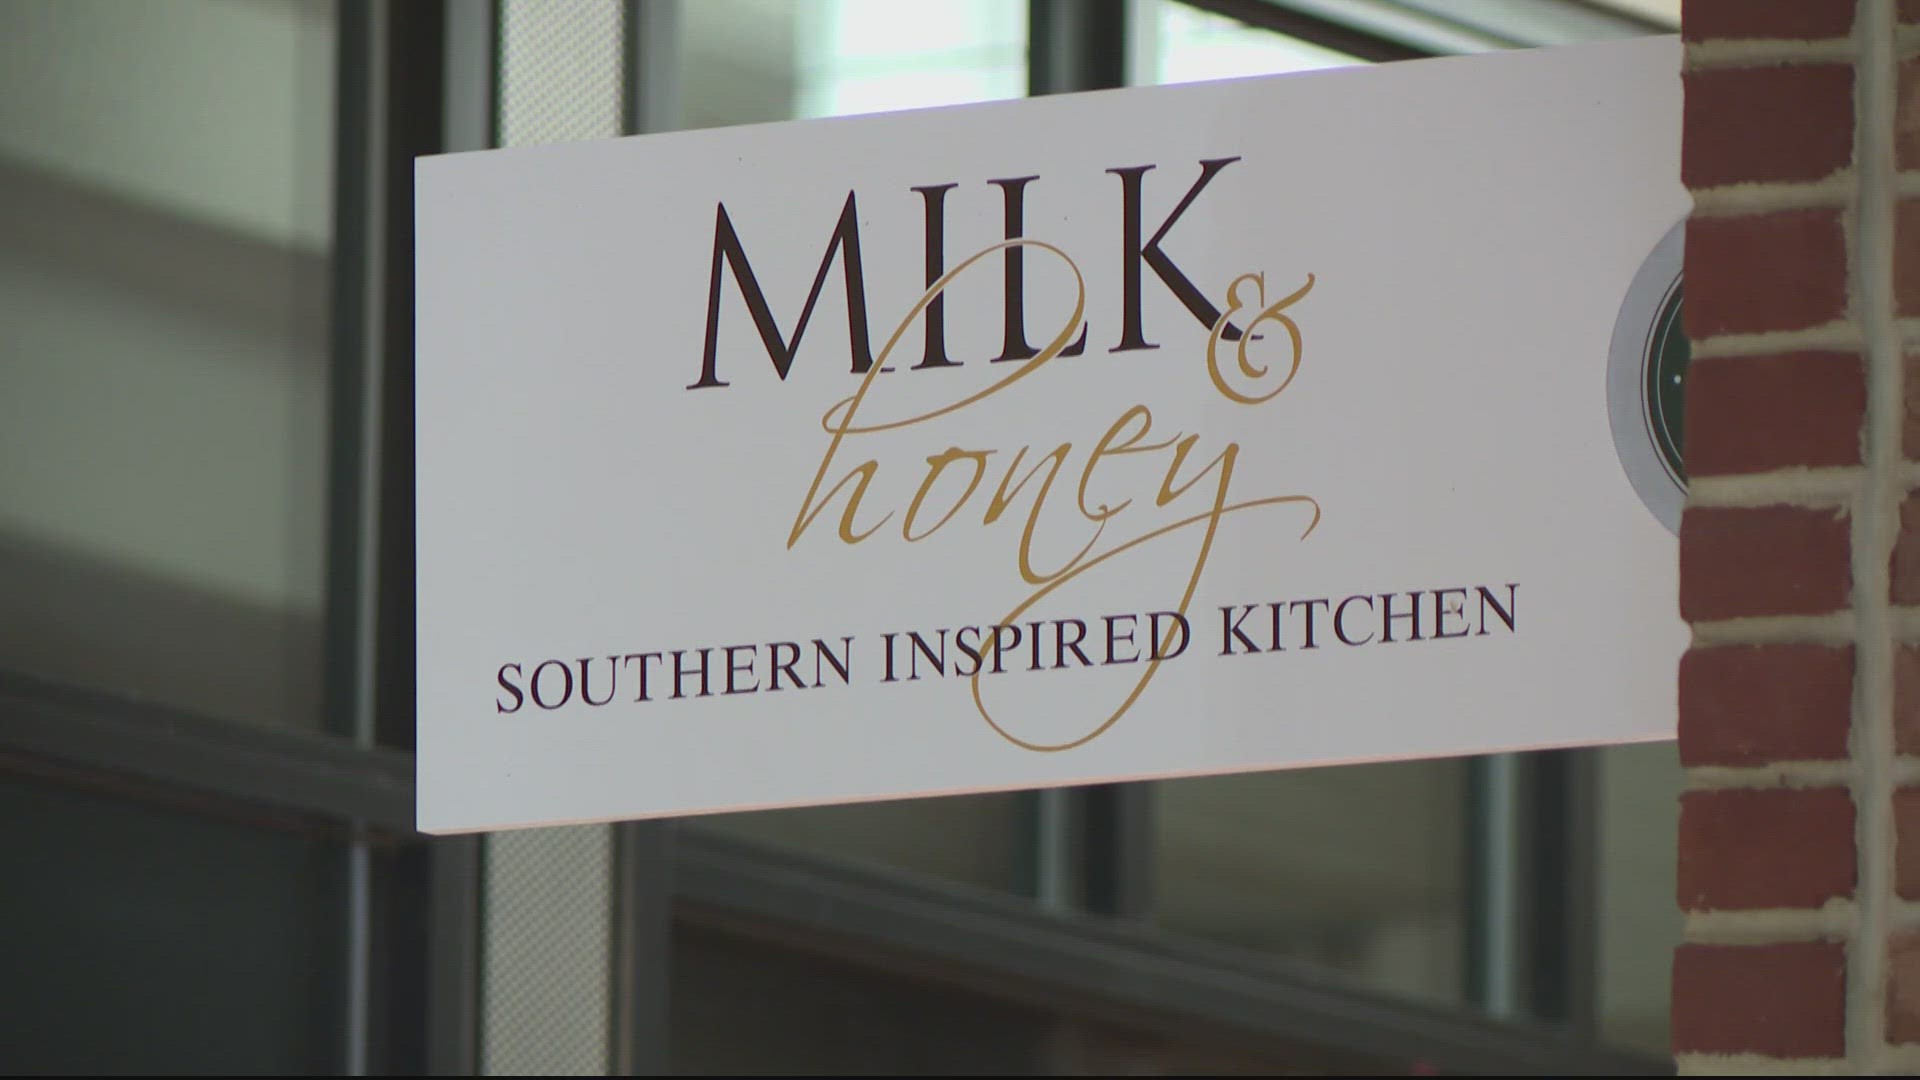 Neighbors were shocked by the shooting in the parking lot of Milk & Honey Cafe in Dulles 28 Centre